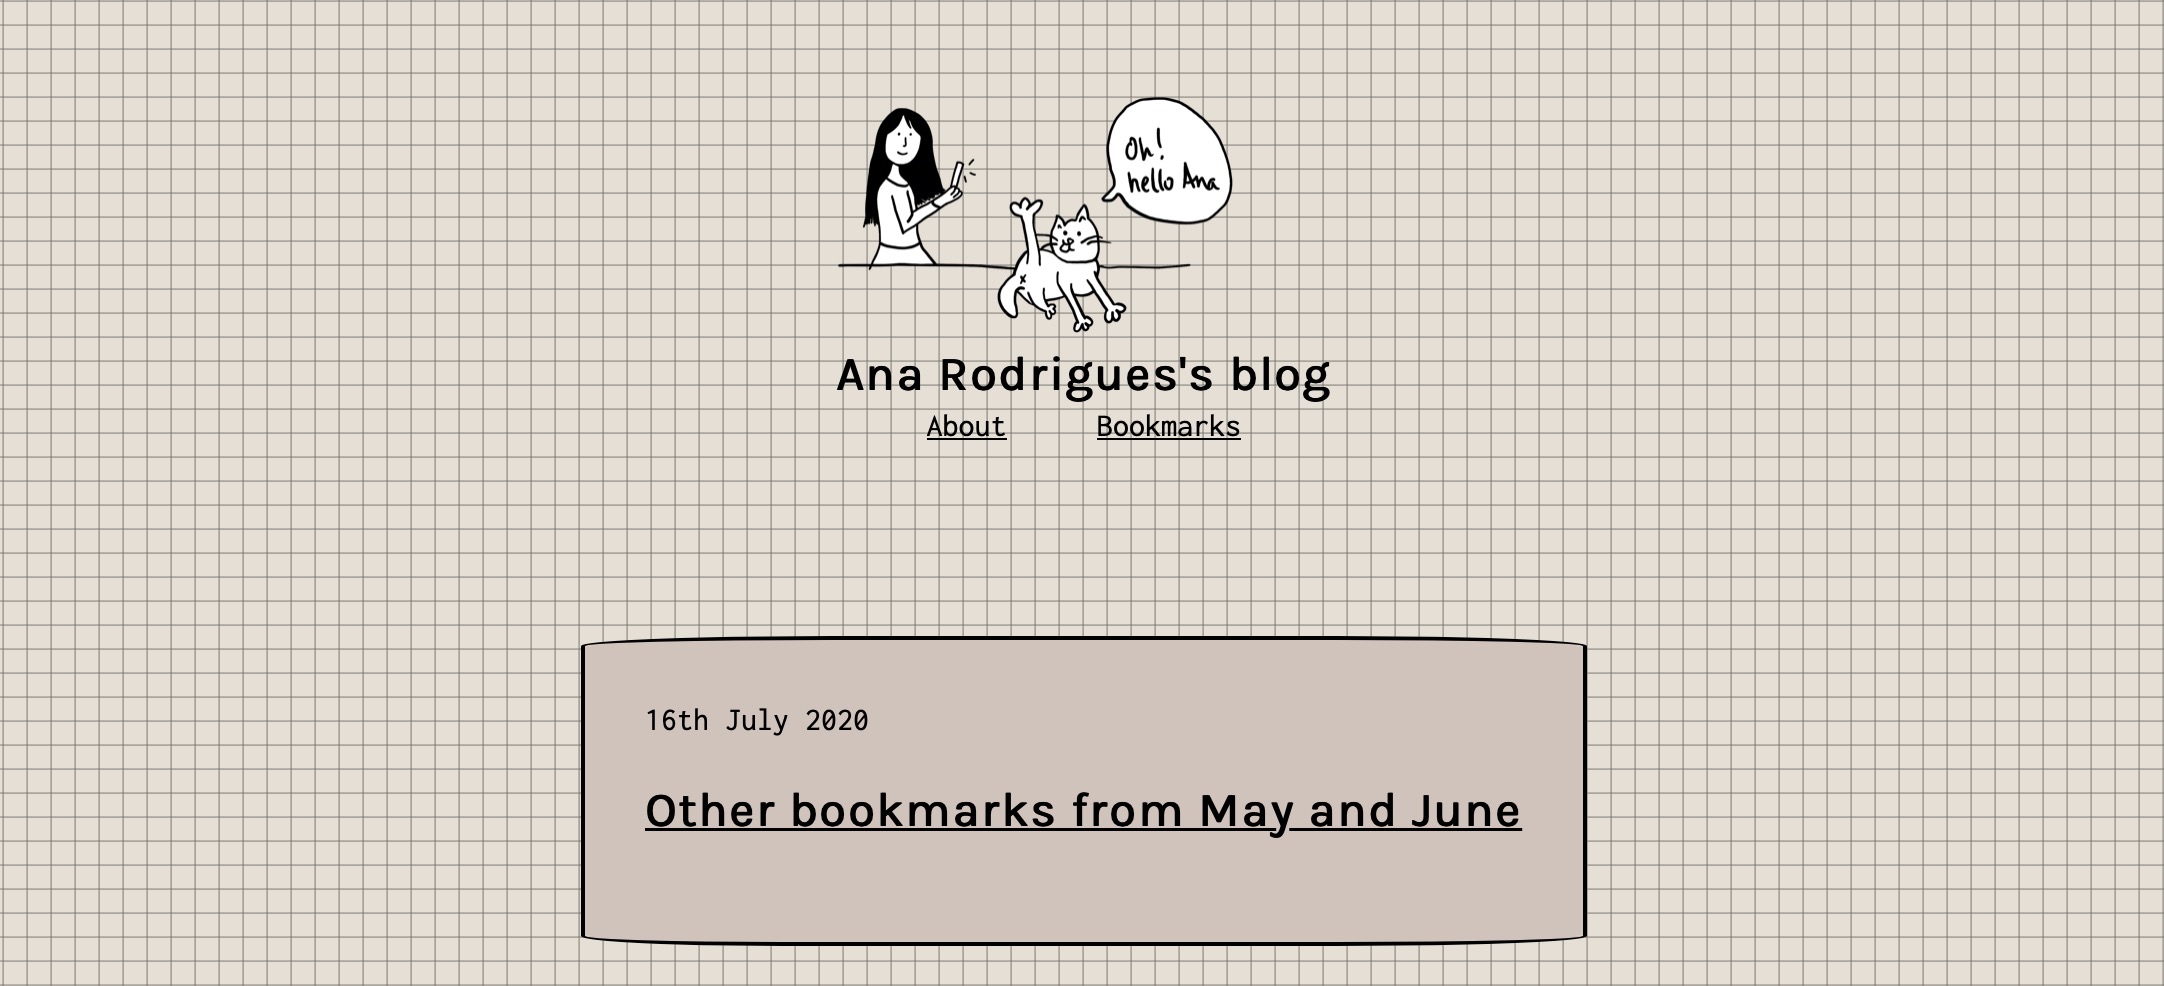 Ana's blog homepage with sketch effect boxes on a grid background